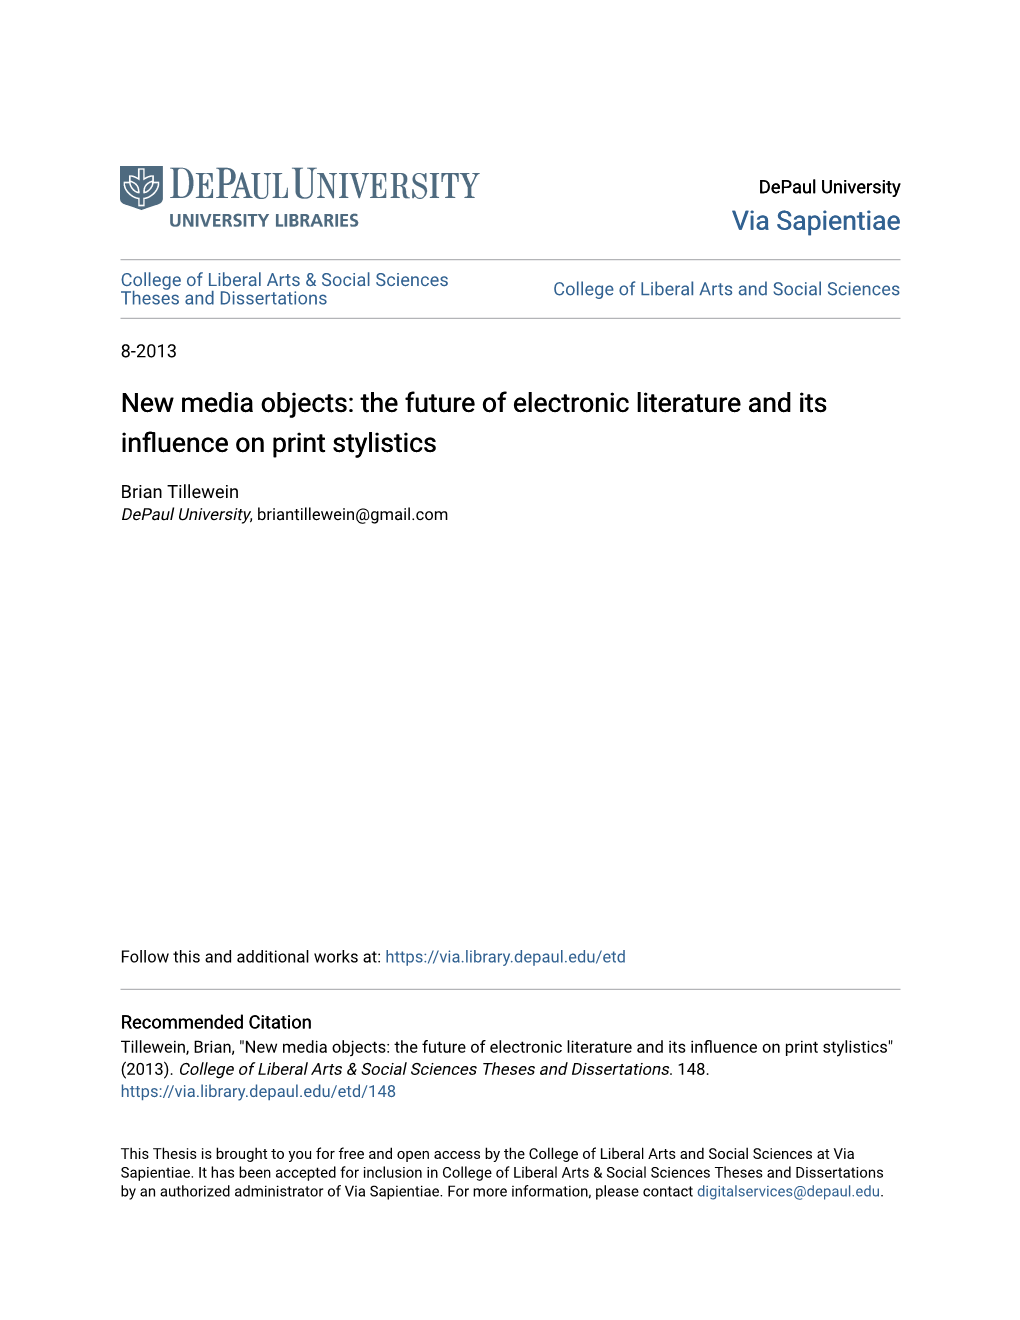 New Media Objects: the Future of Electronic Literature and Its Influence on Print Stylistics